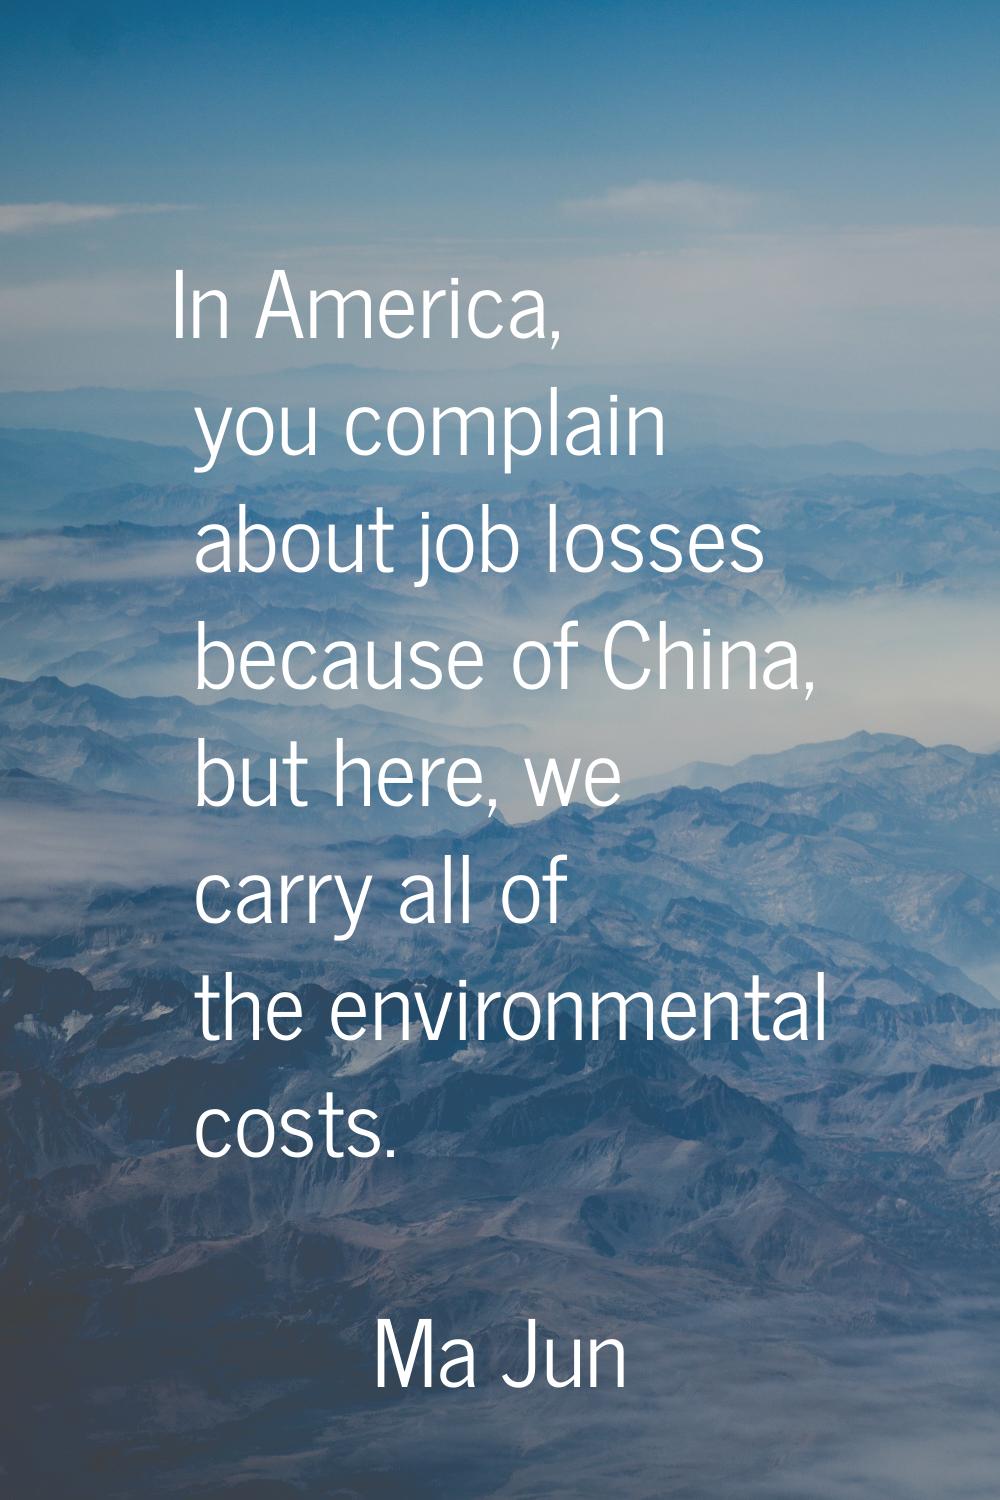 In America, you complain about job losses because of China, but here, we carry all of the environme